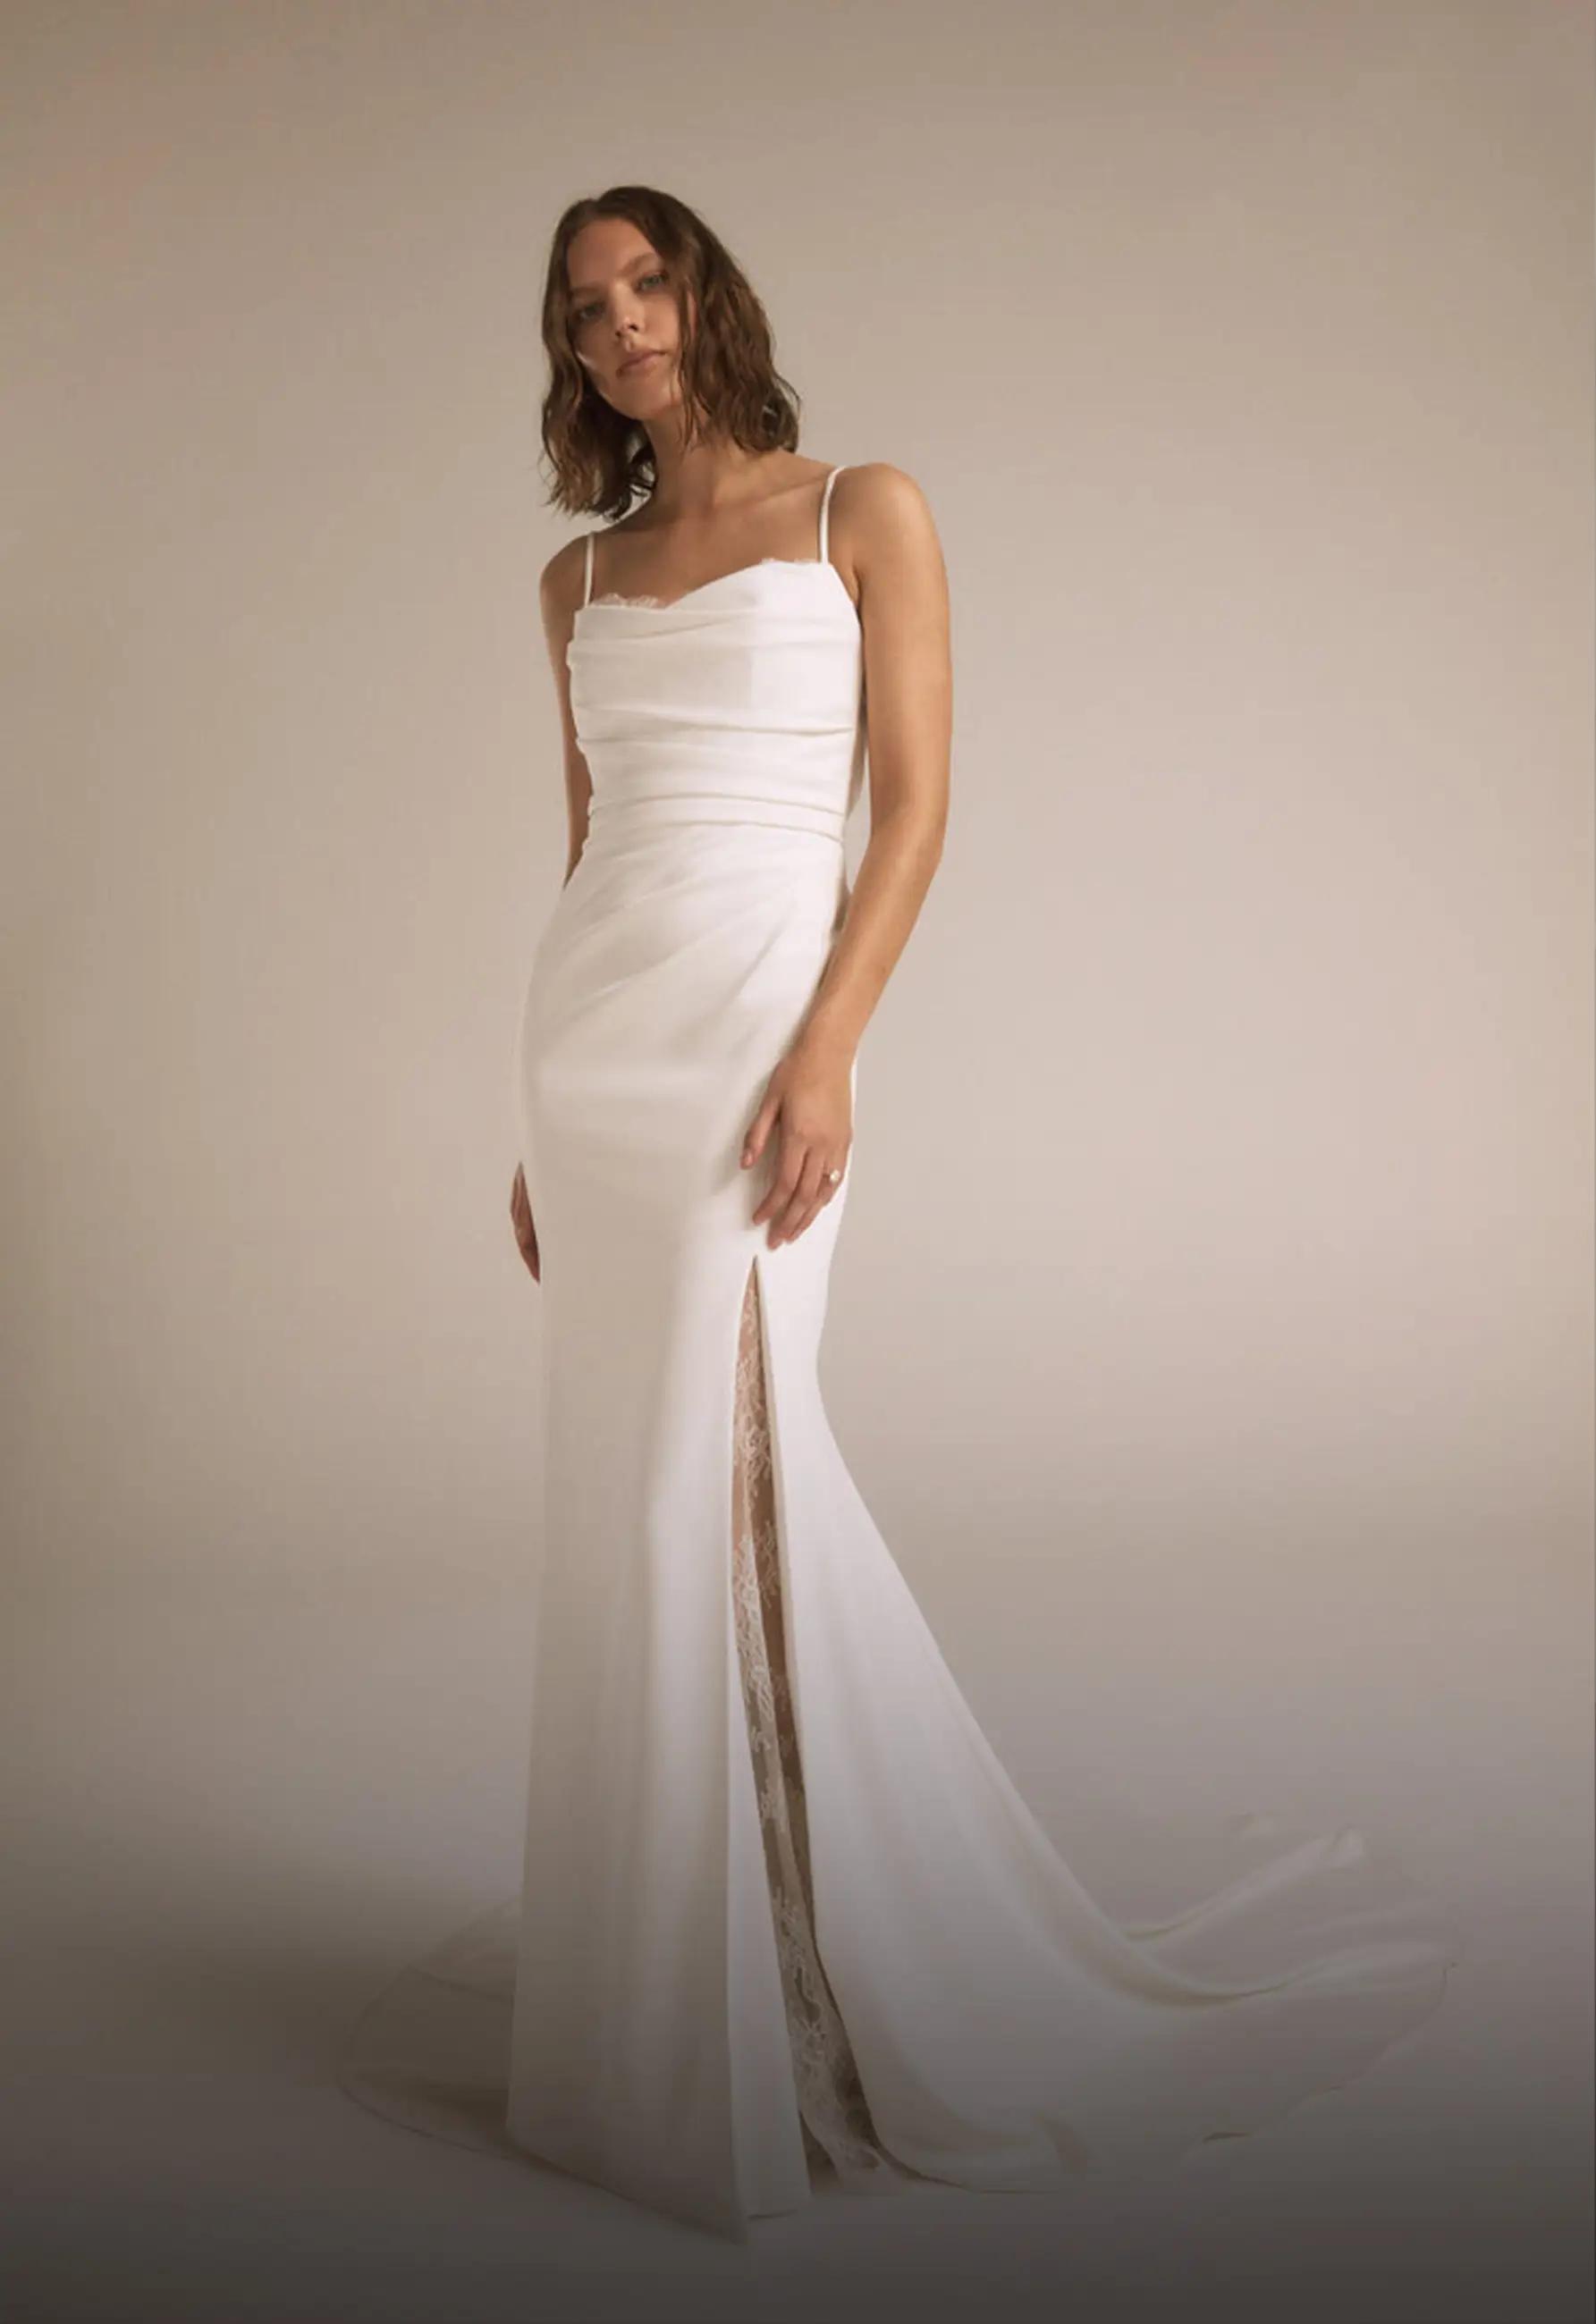 Model wearing a white gown by Fit & Flare, Orlando bridal shop